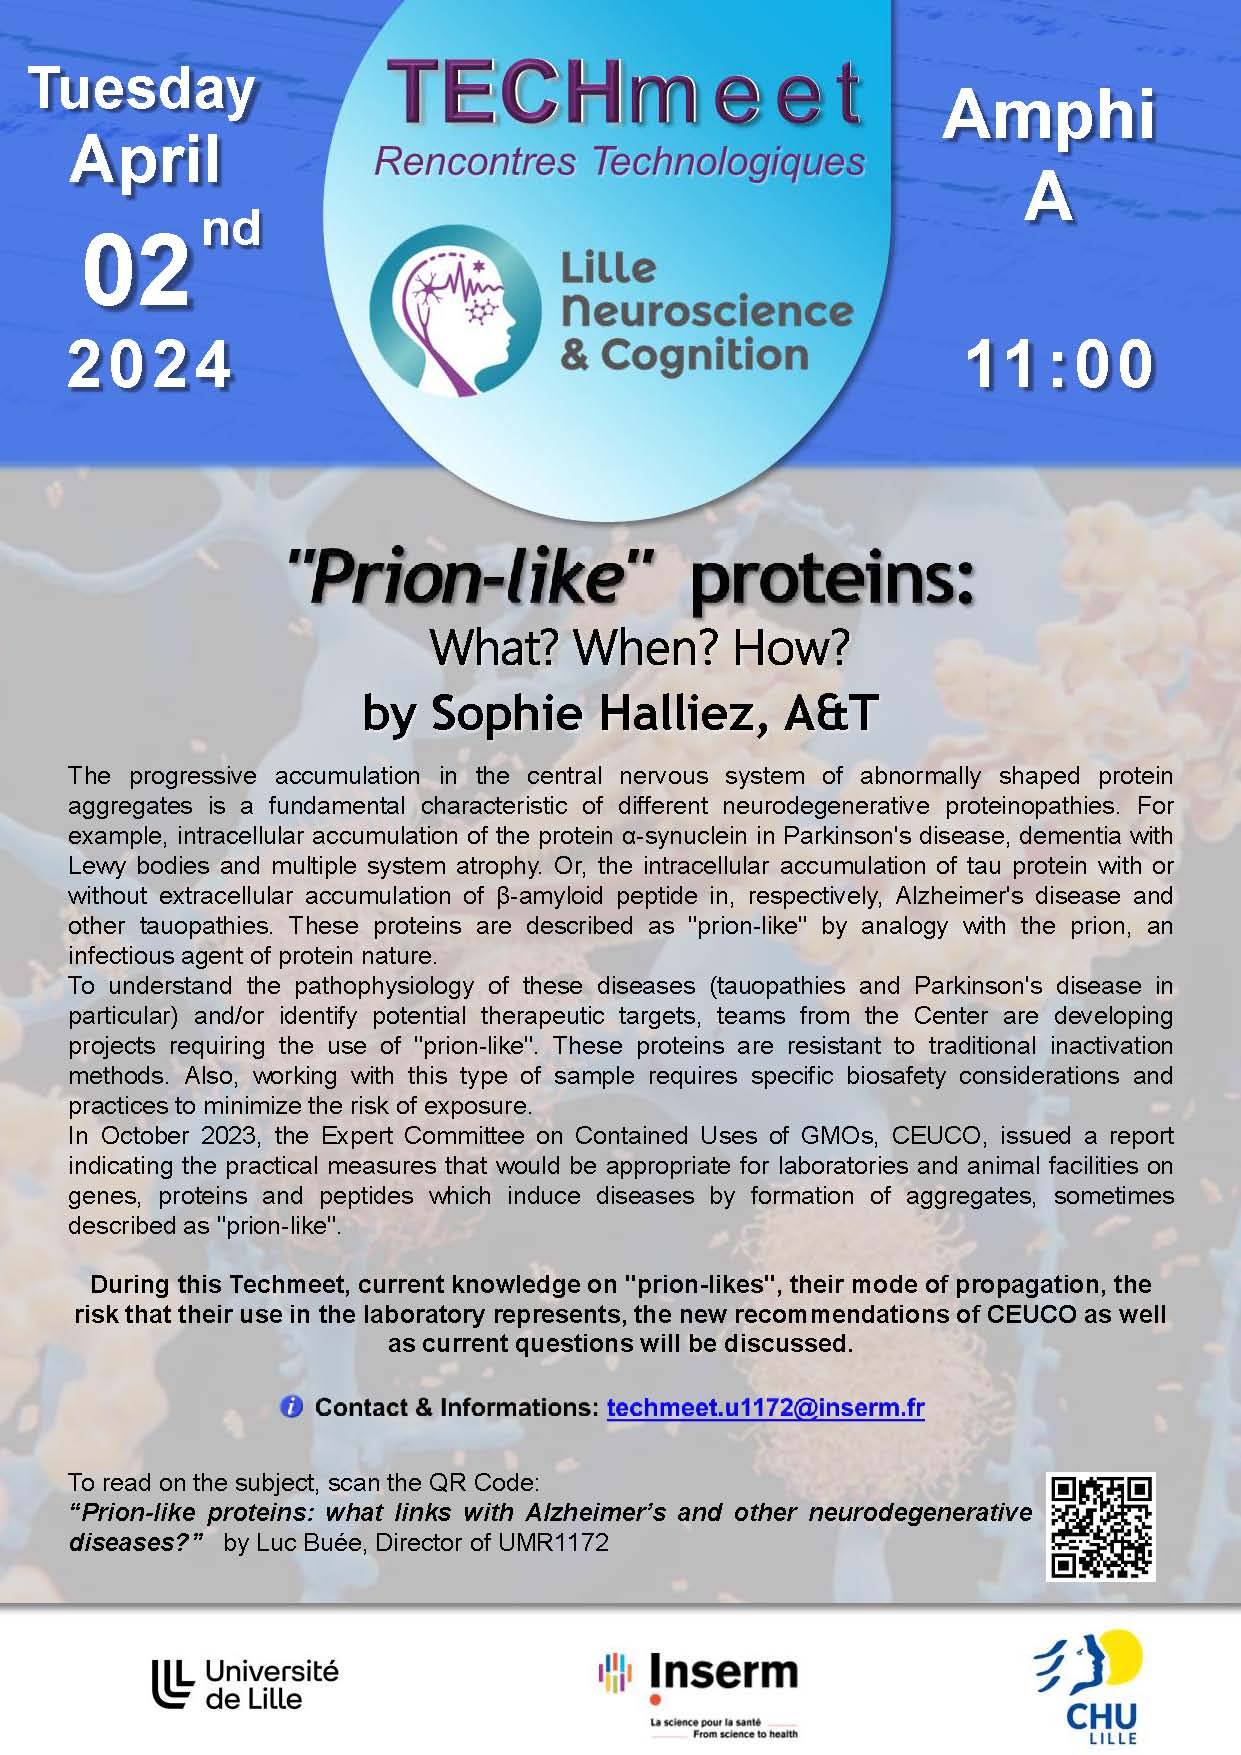 Affiche _Techmeet Prion-like protein _02 avril 2024_version anglaise